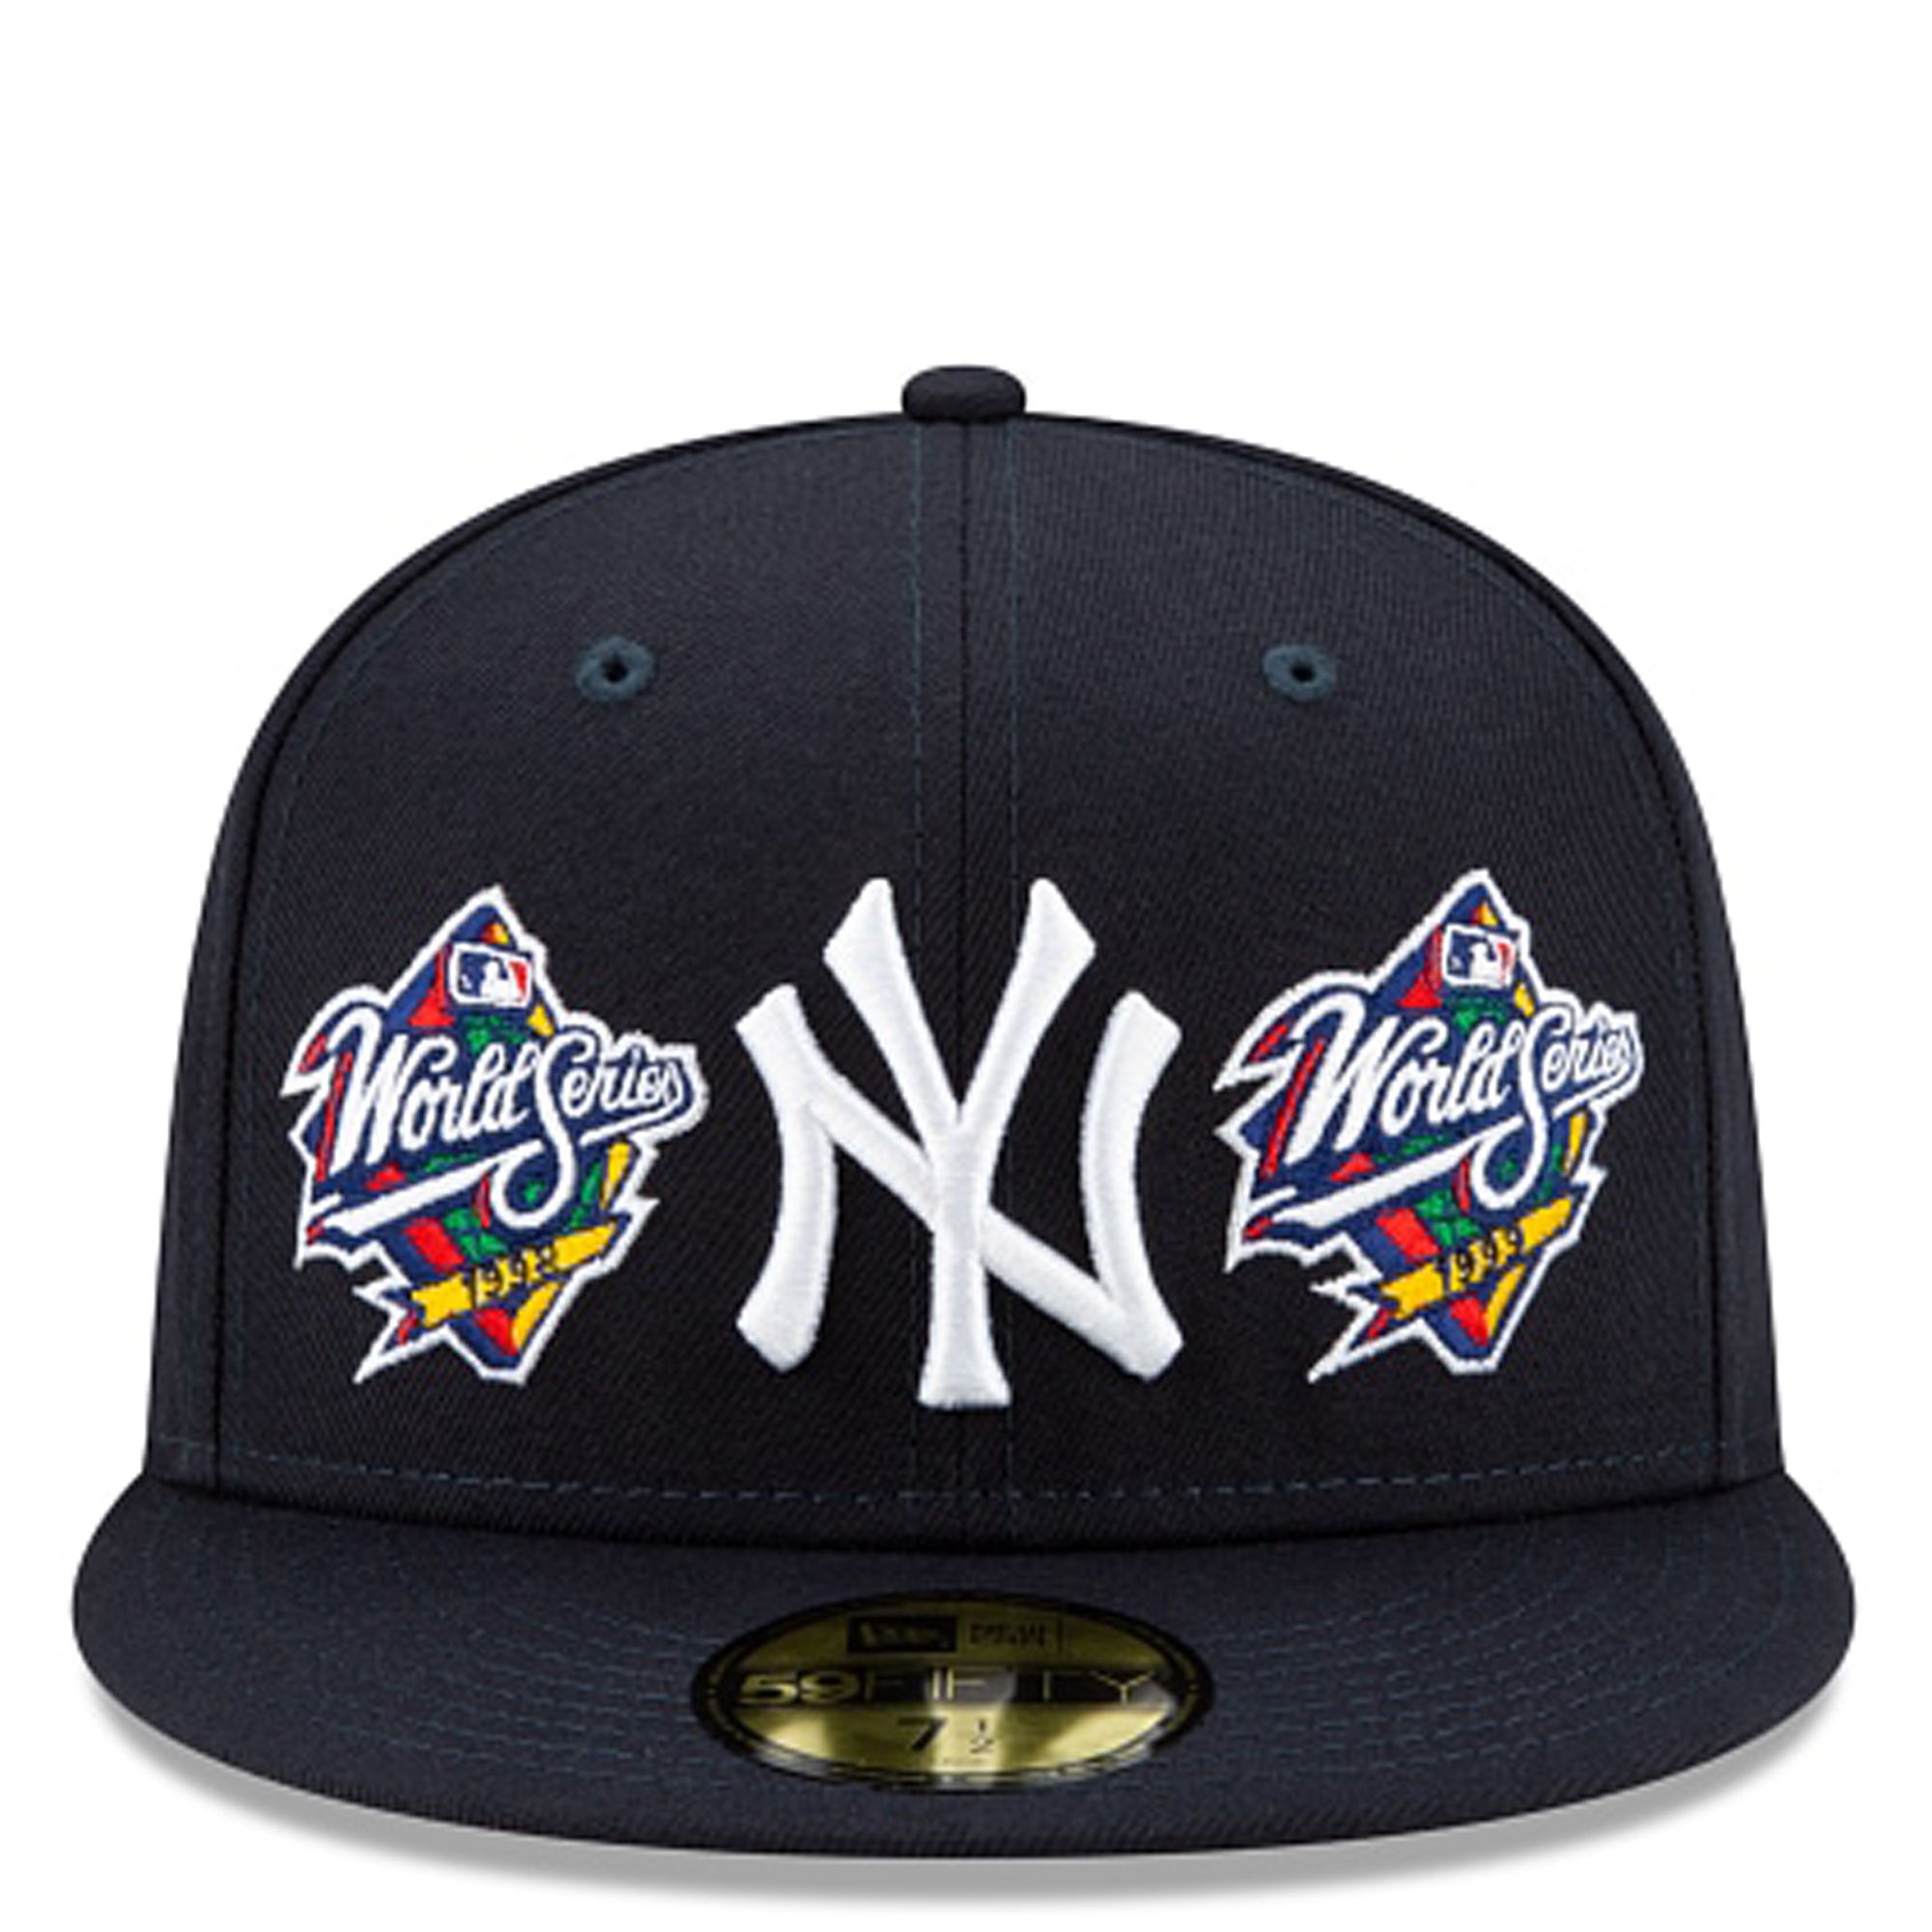 New Era New York Yankees MLB World Series Champions Hat in Navy, Men's at Urban Outfitters